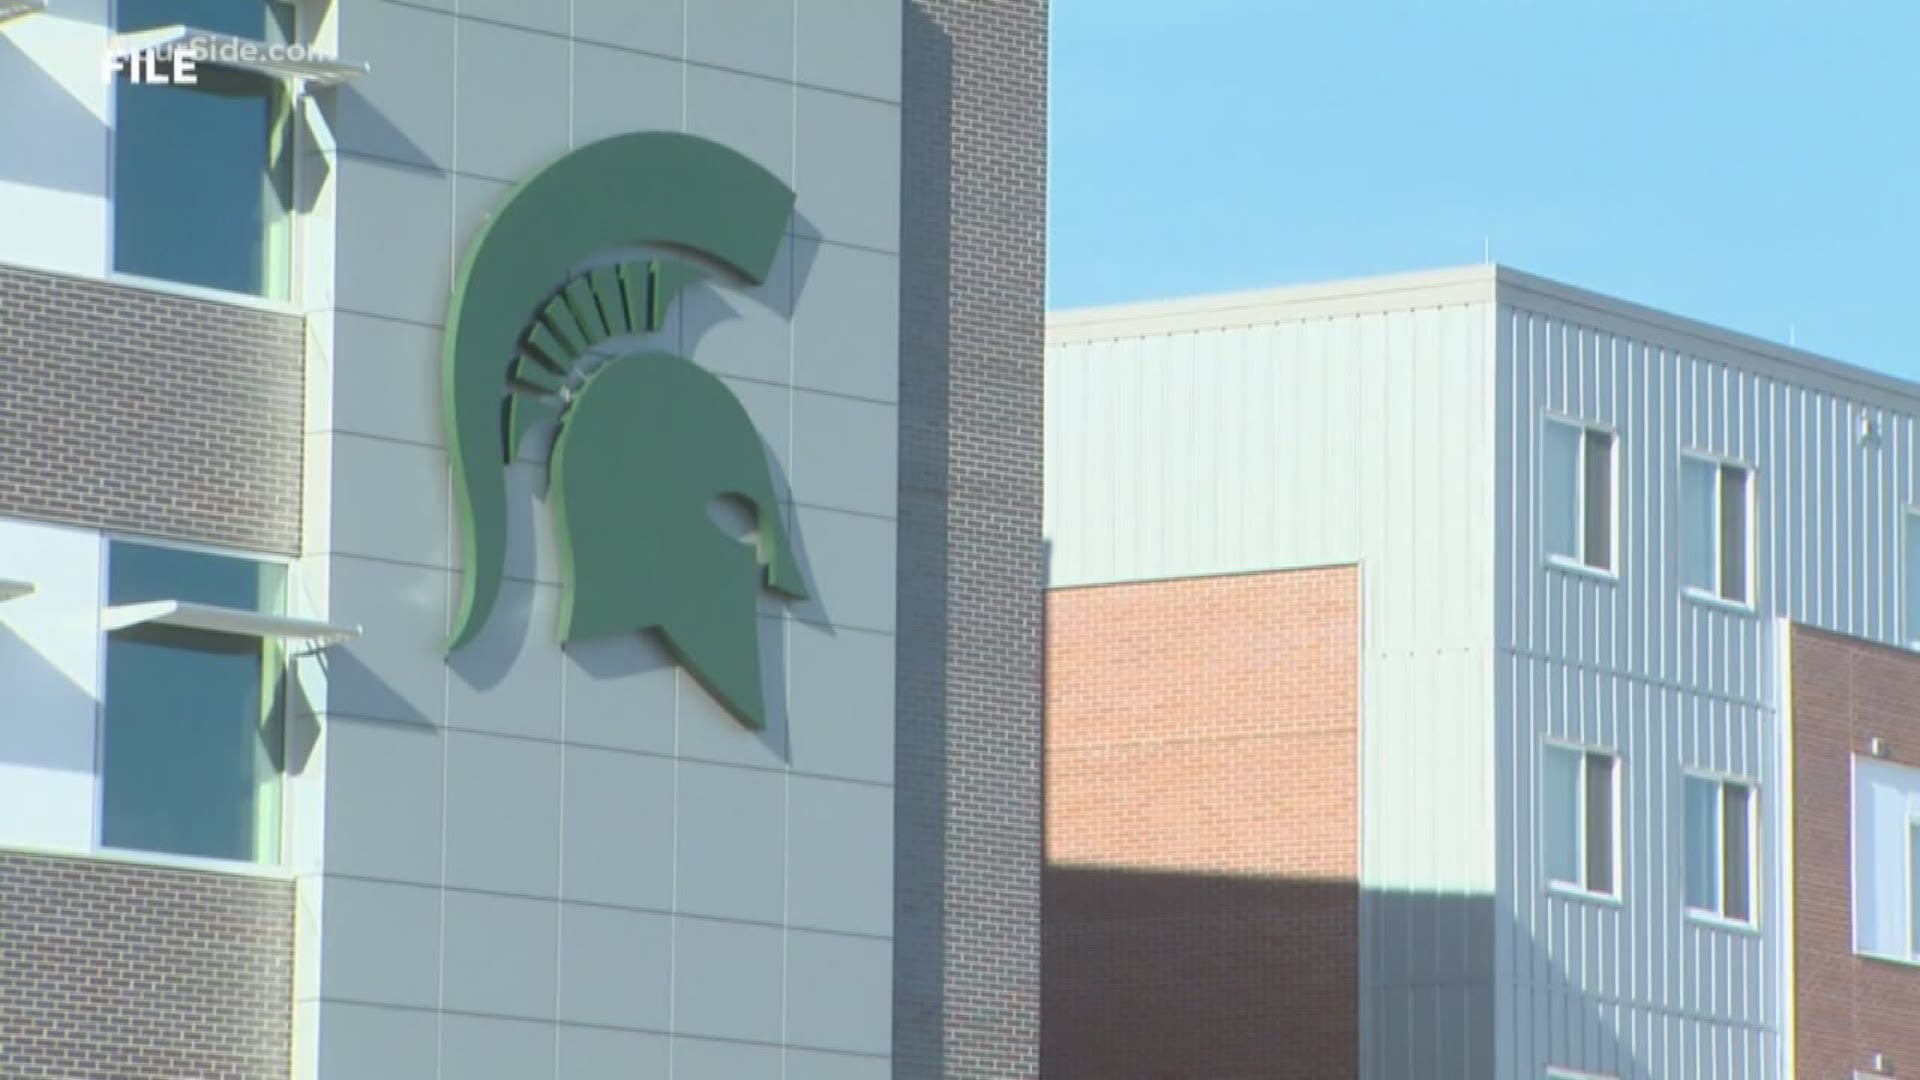 Michigan State University has agreed to better protect patients from sexual assaults, including following a chaperone requirement for sensitive medical exams, to resolve a federal civil-rights investigation into Larry Nassar's abuse of young gymnasts and other athletes under the guise of medical treatment.